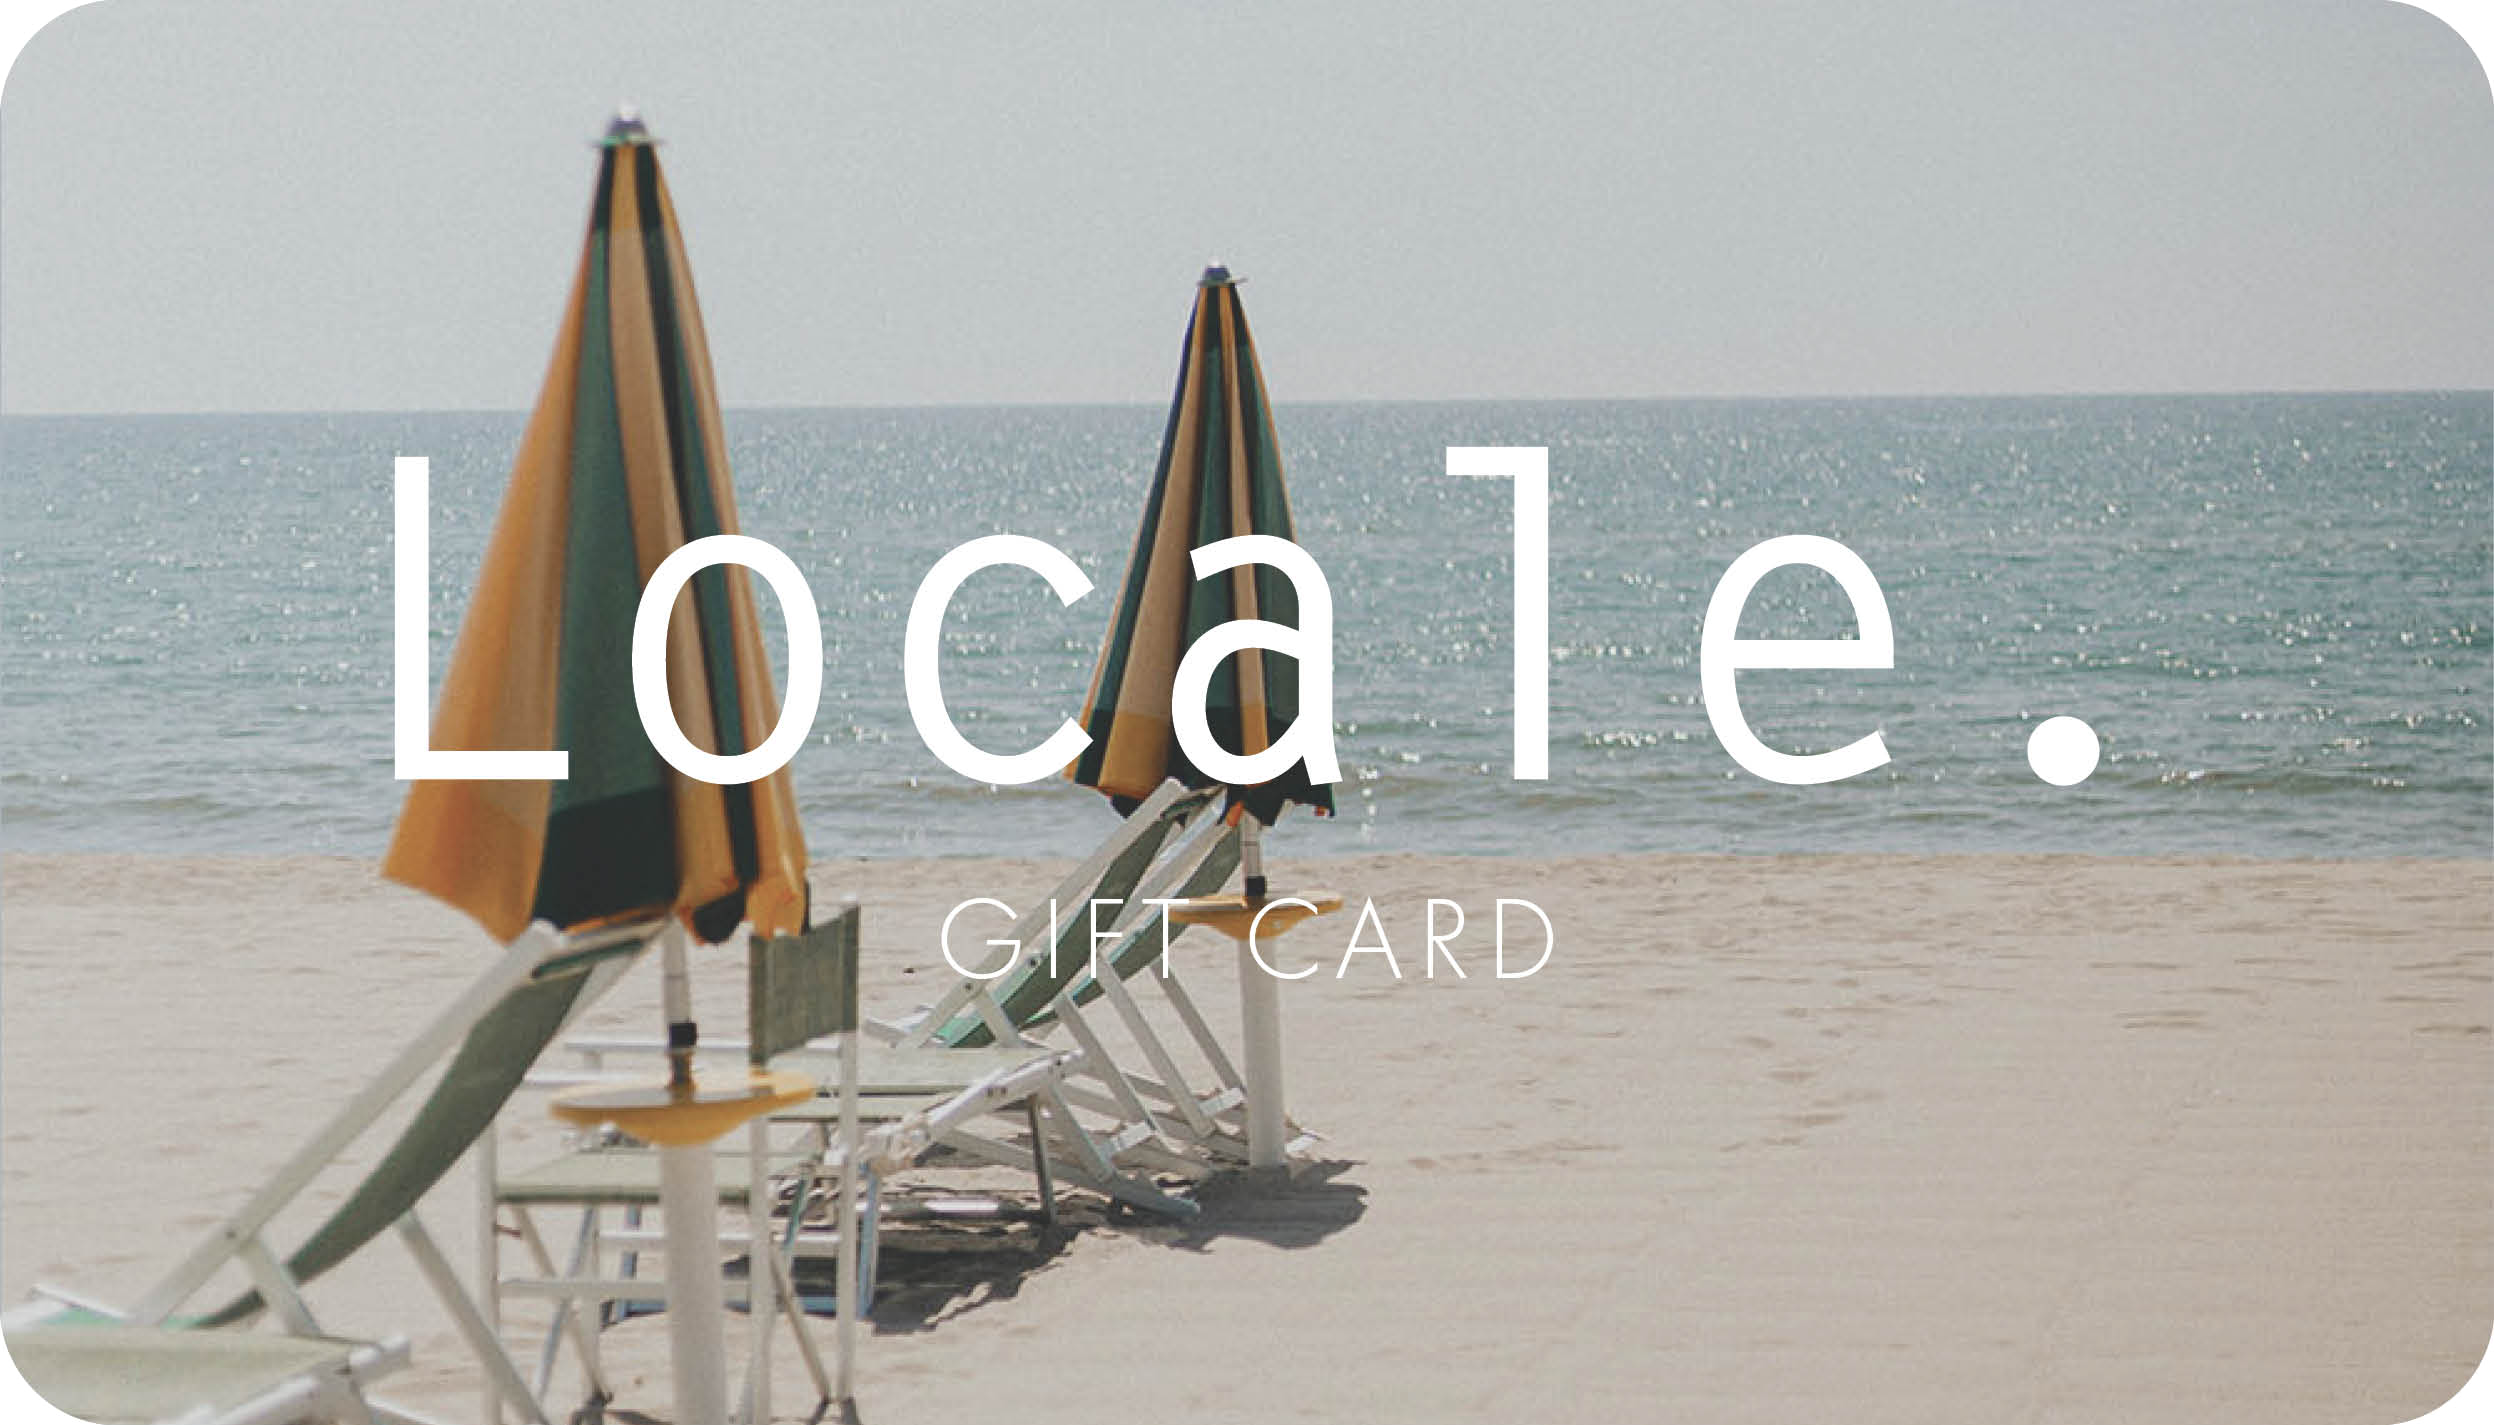 Locale Potts Point Gift Card